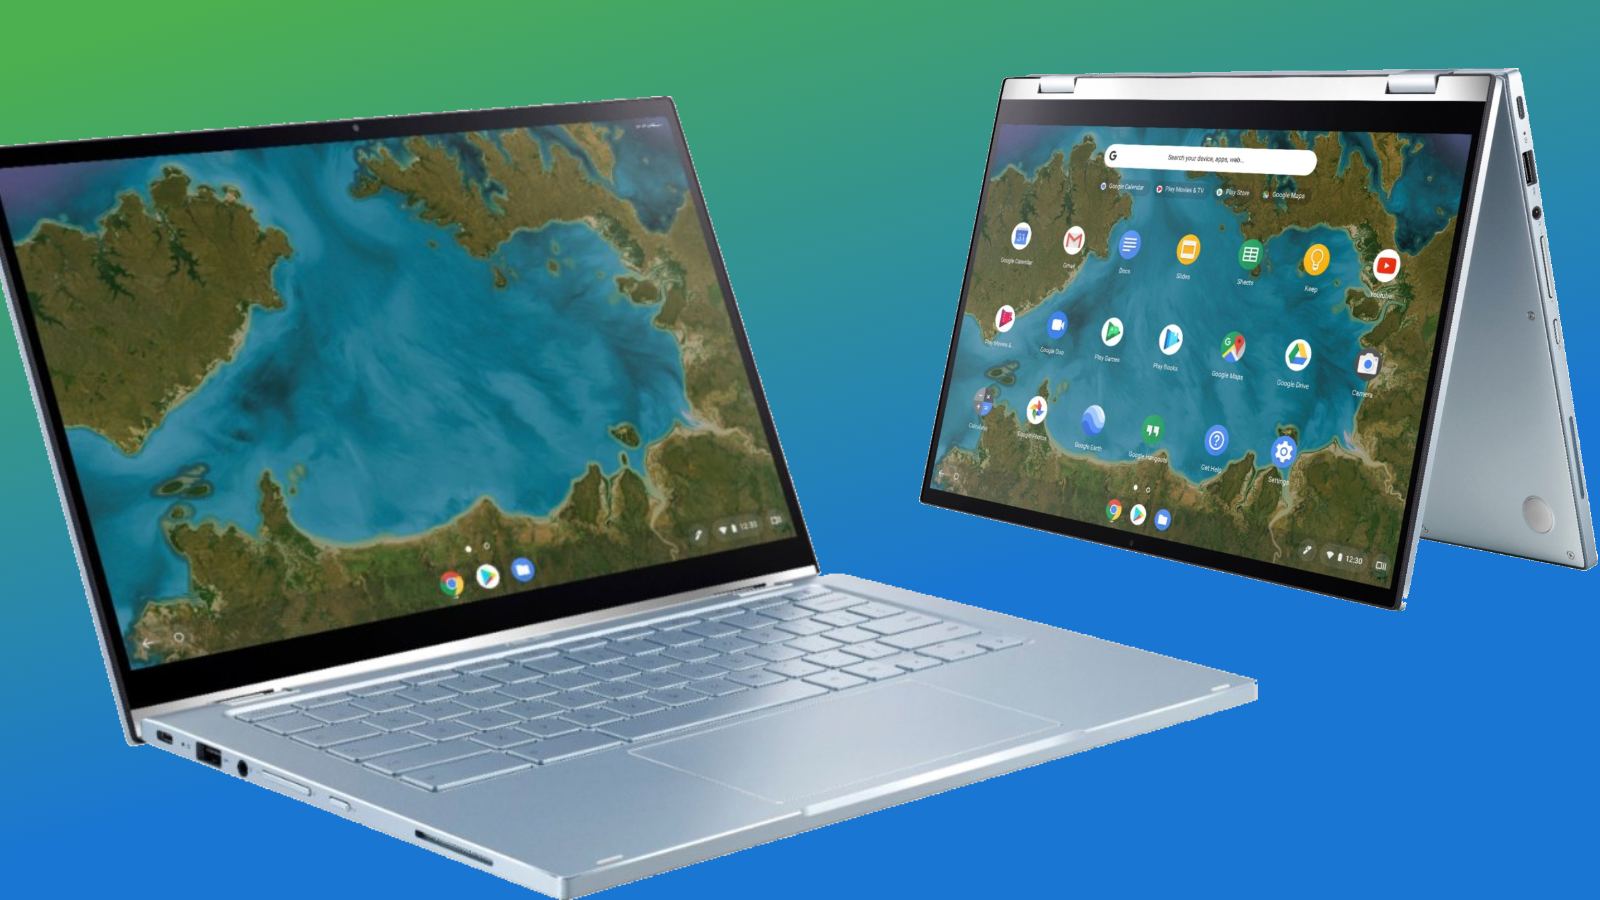 Move Over Pixel 4 New Leaked Images Of The Upcoming Asus Chromebook Flip C433 1600x900 Wallpaper Teahub Io